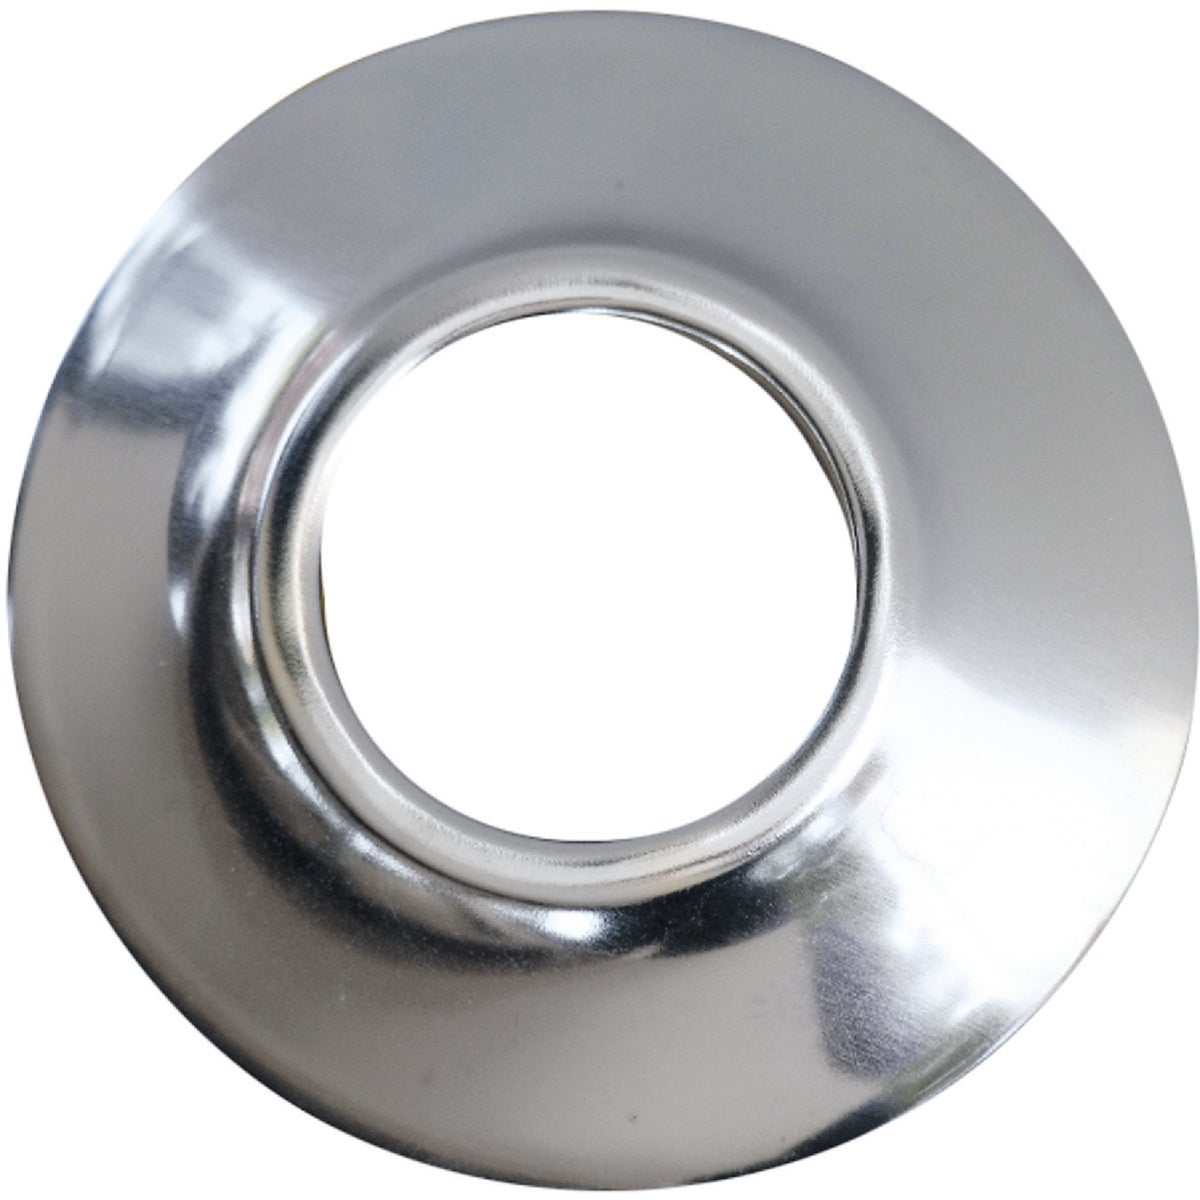 Lasco 1/2 In. IP or 3/4 In. Copper Chrome Plated Flange